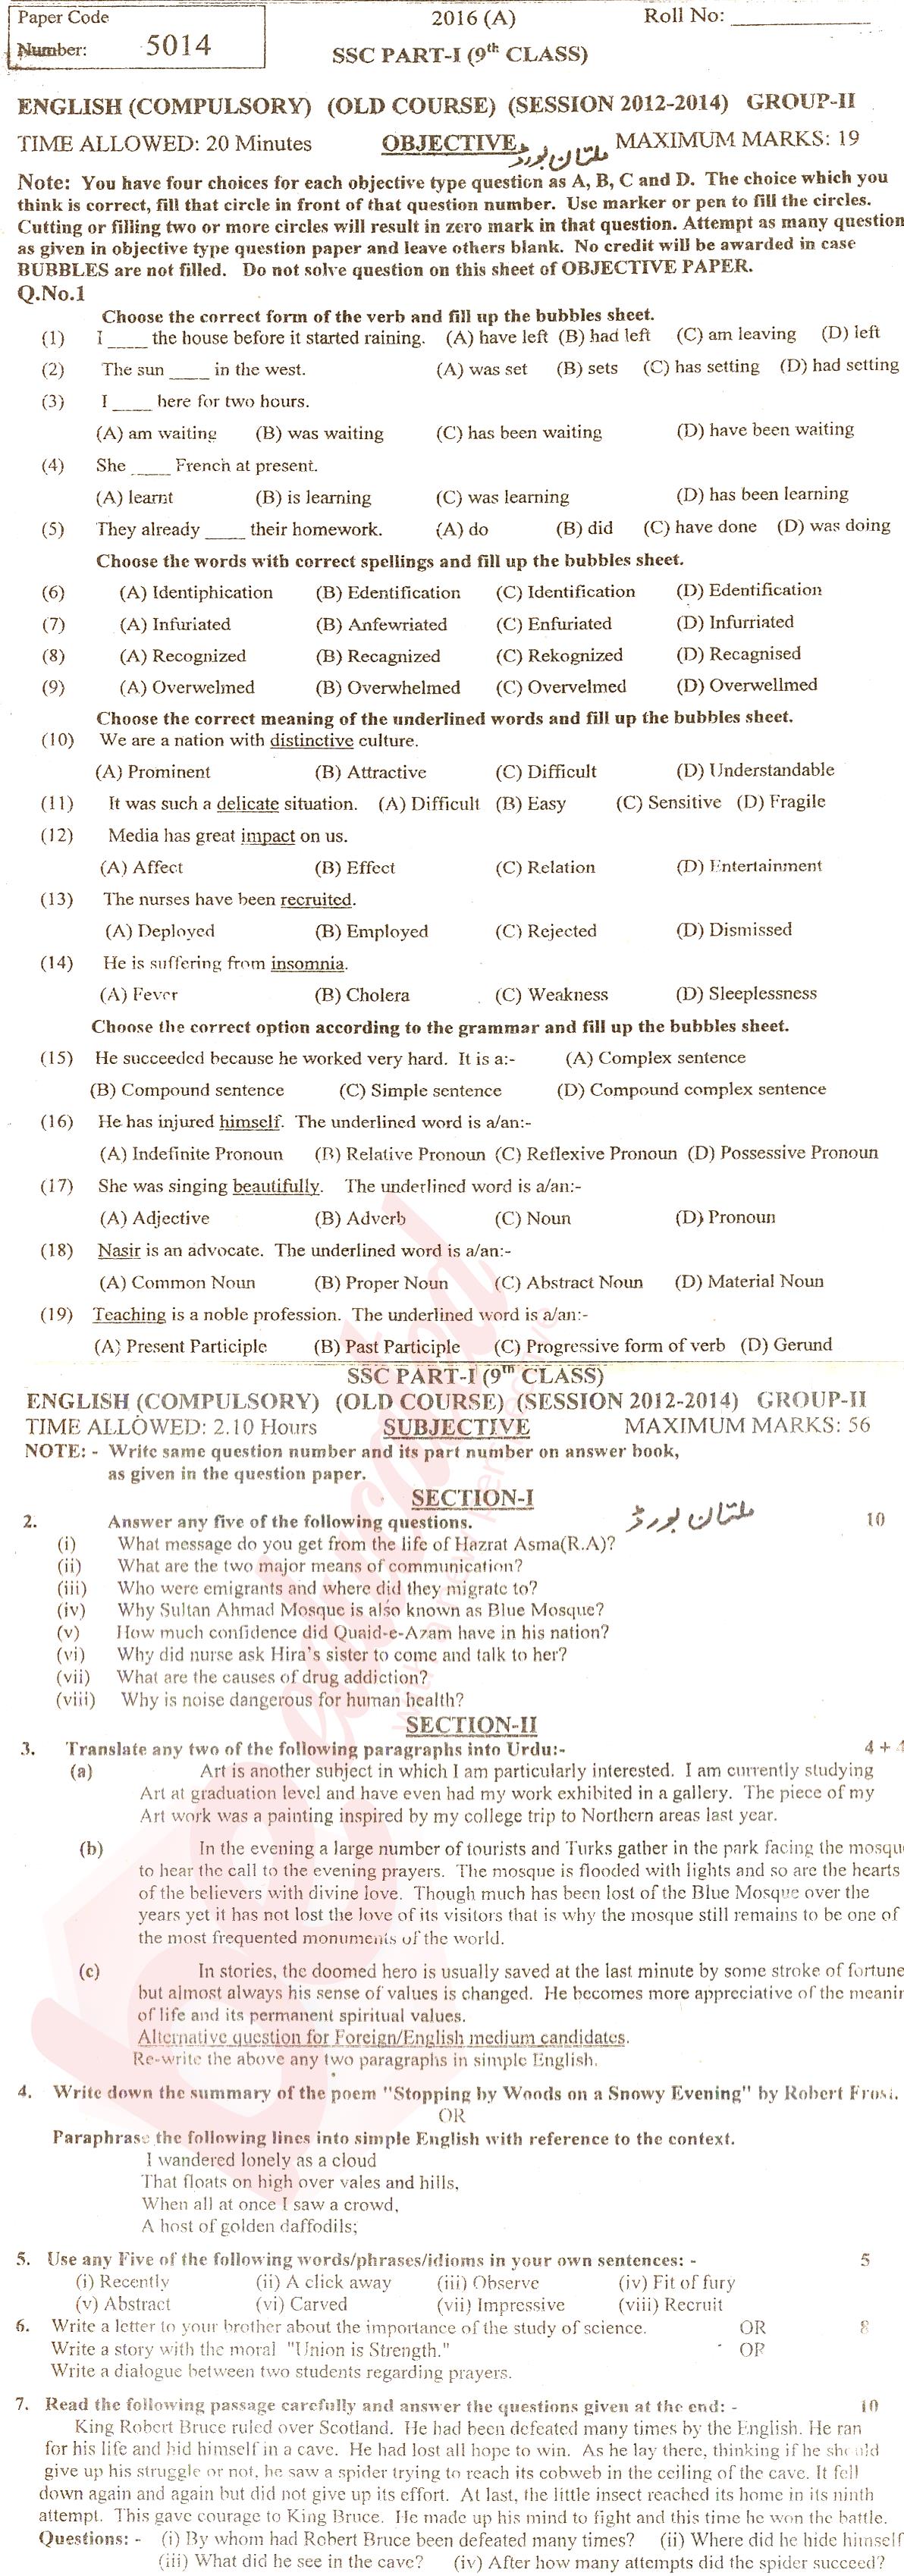 English 9th class Past Paper Group 2 BISE Multan 2016